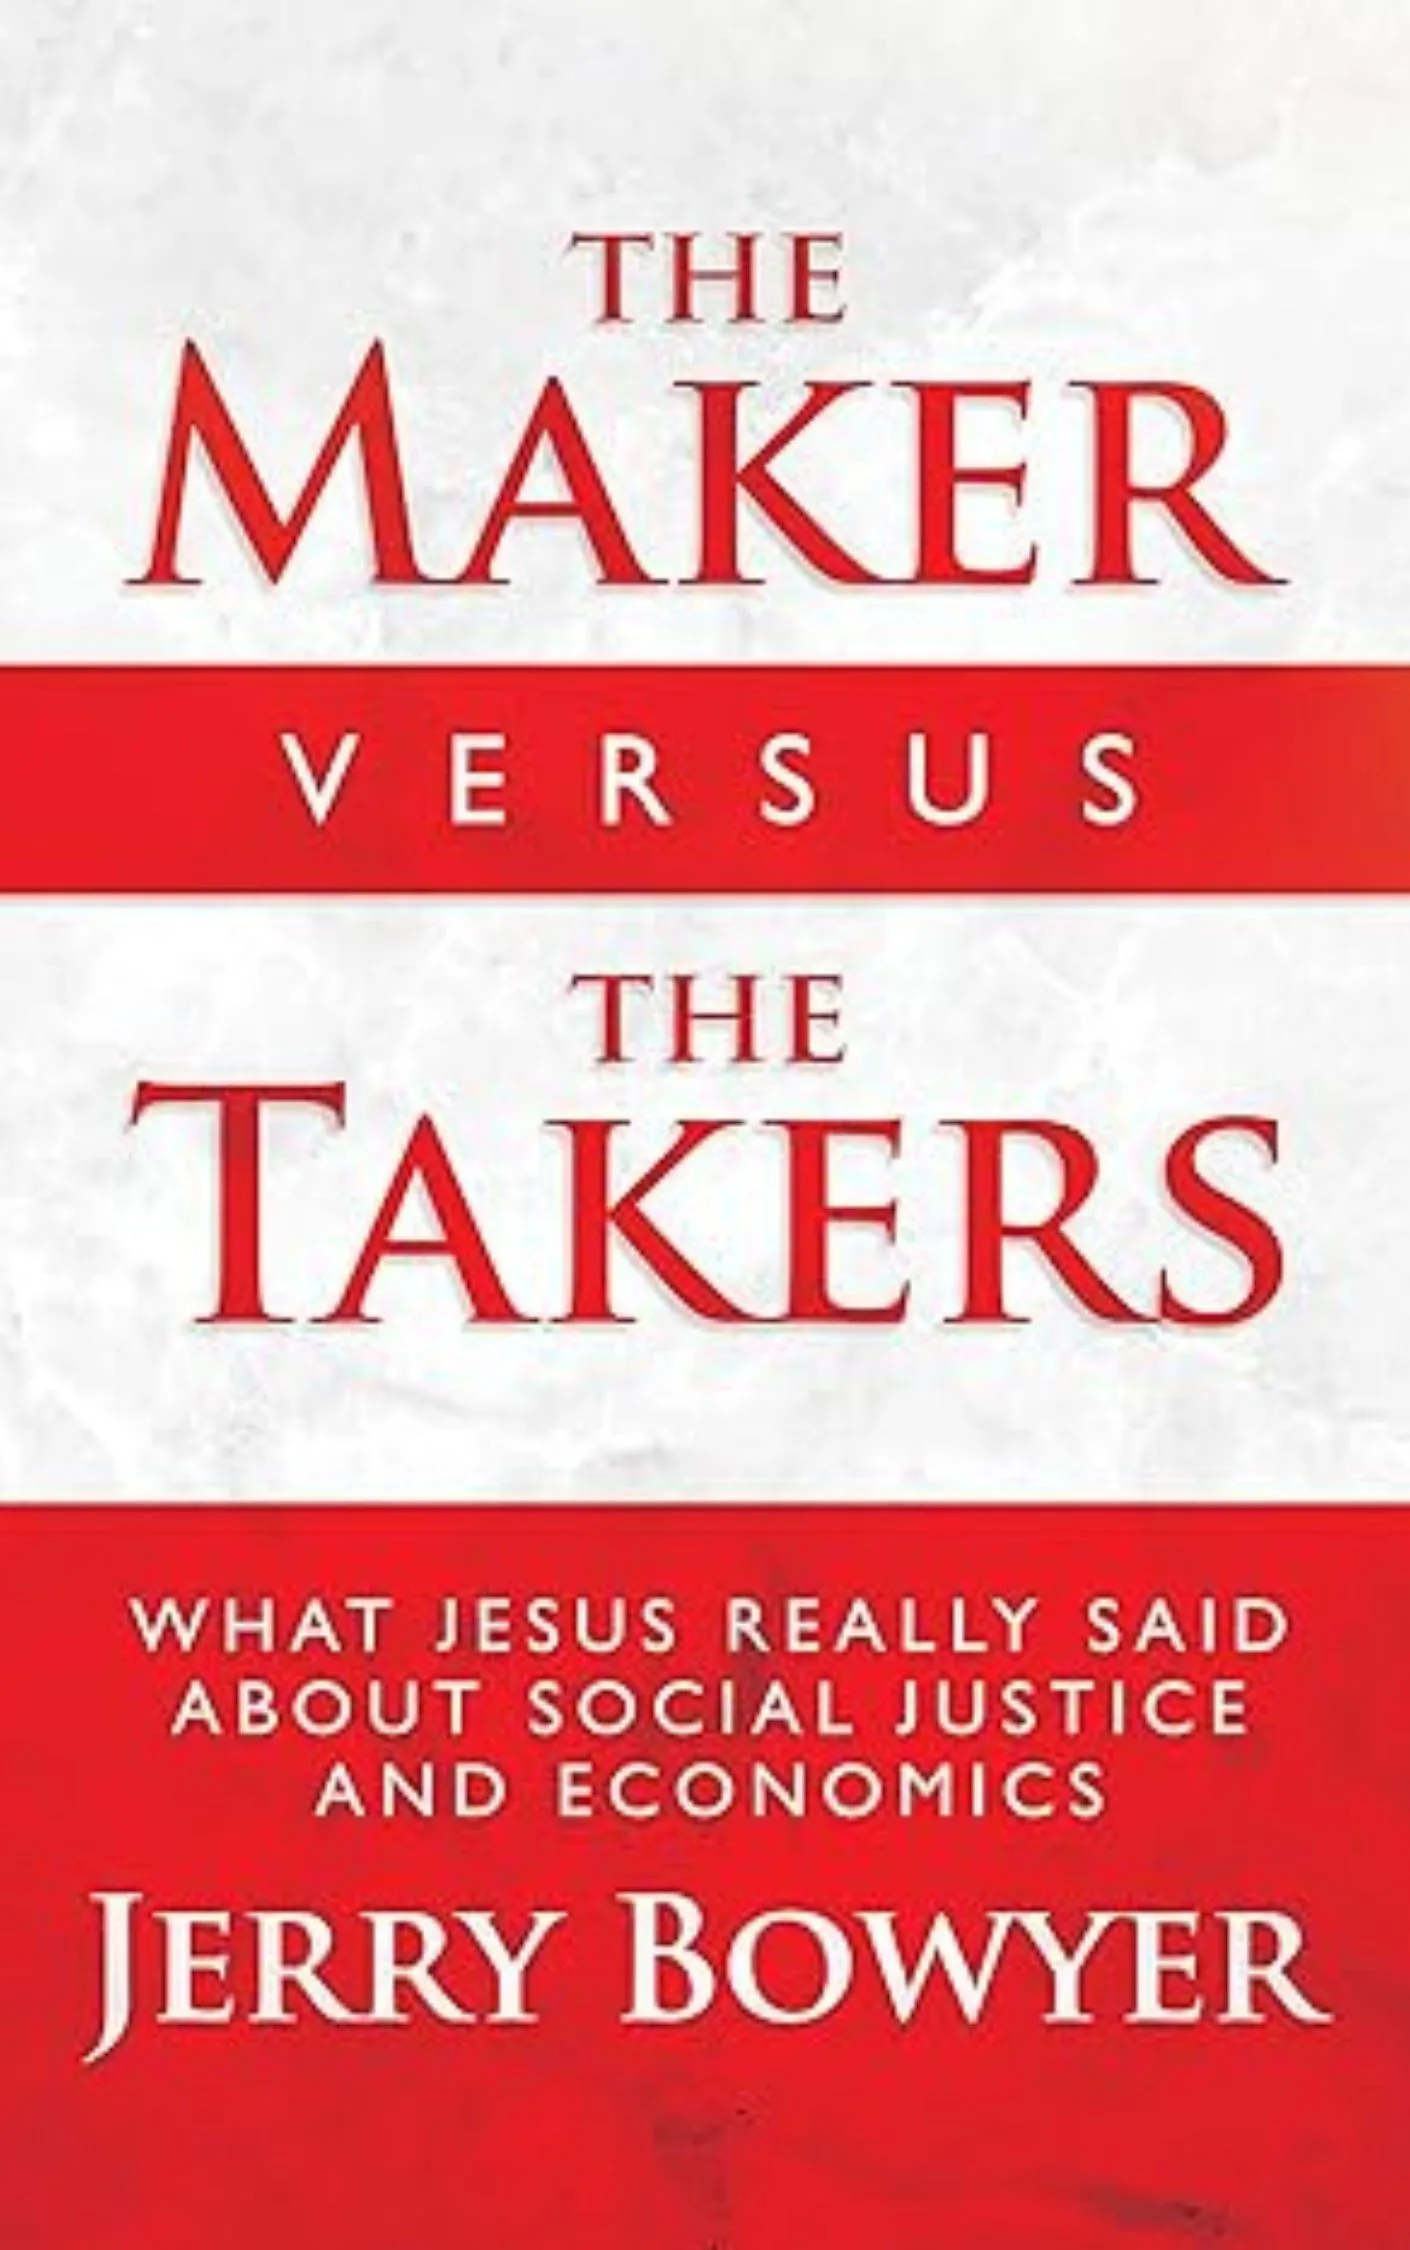 The Maker Versus the Takers: What Jesus Really Said About Social Justice and Economics by Jerry Bowyer